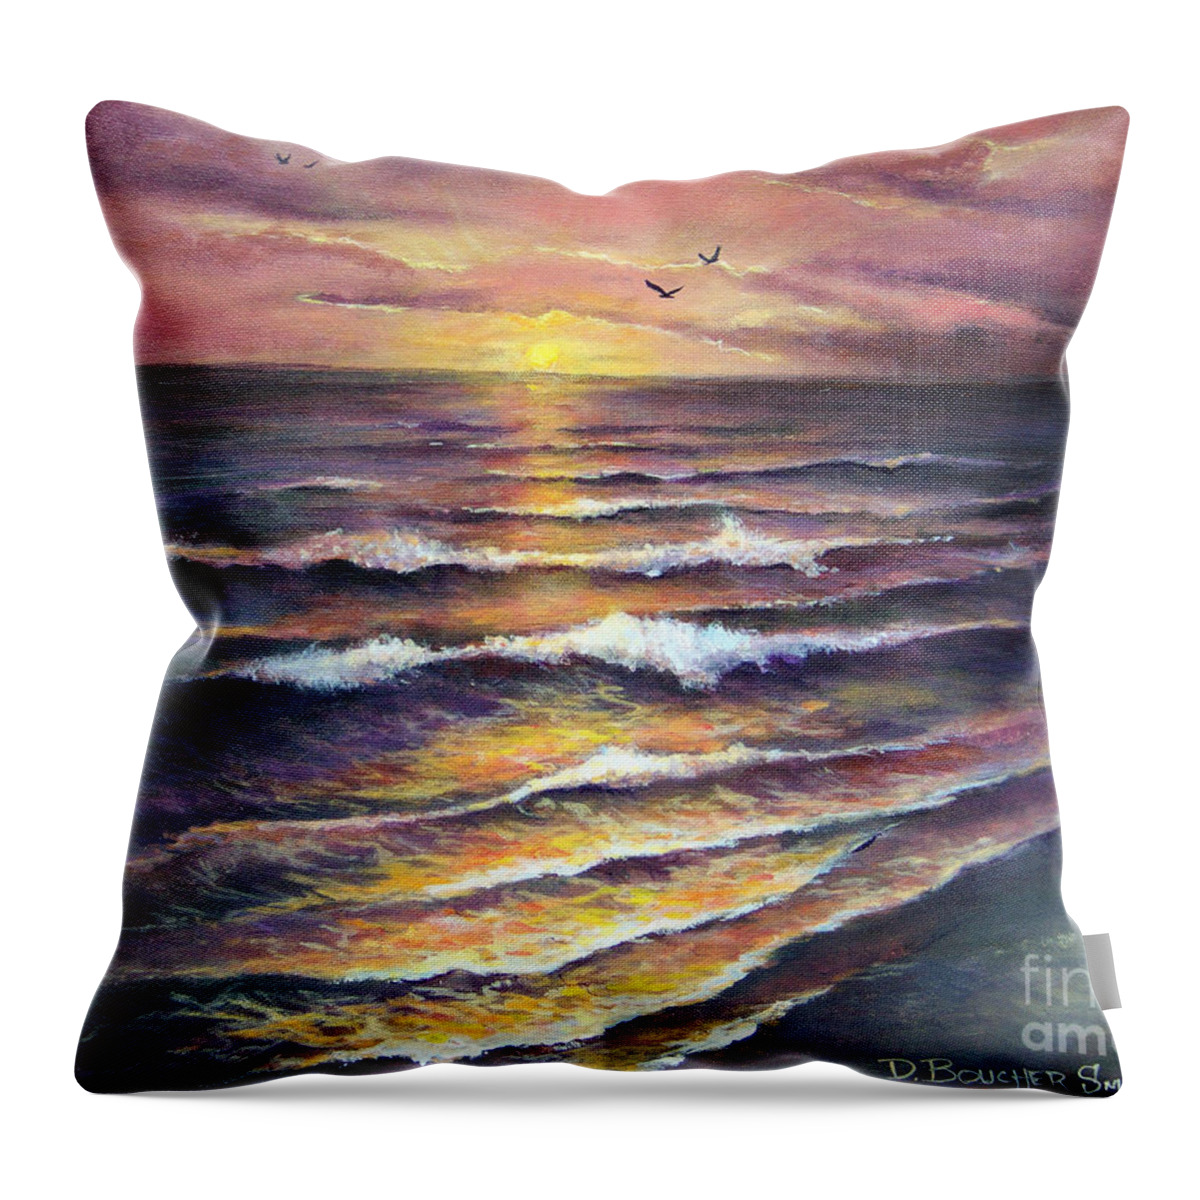 Gulf Of Mexico Throw Pillow featuring the painting Gulf Coast Sunset by Deborah Smith